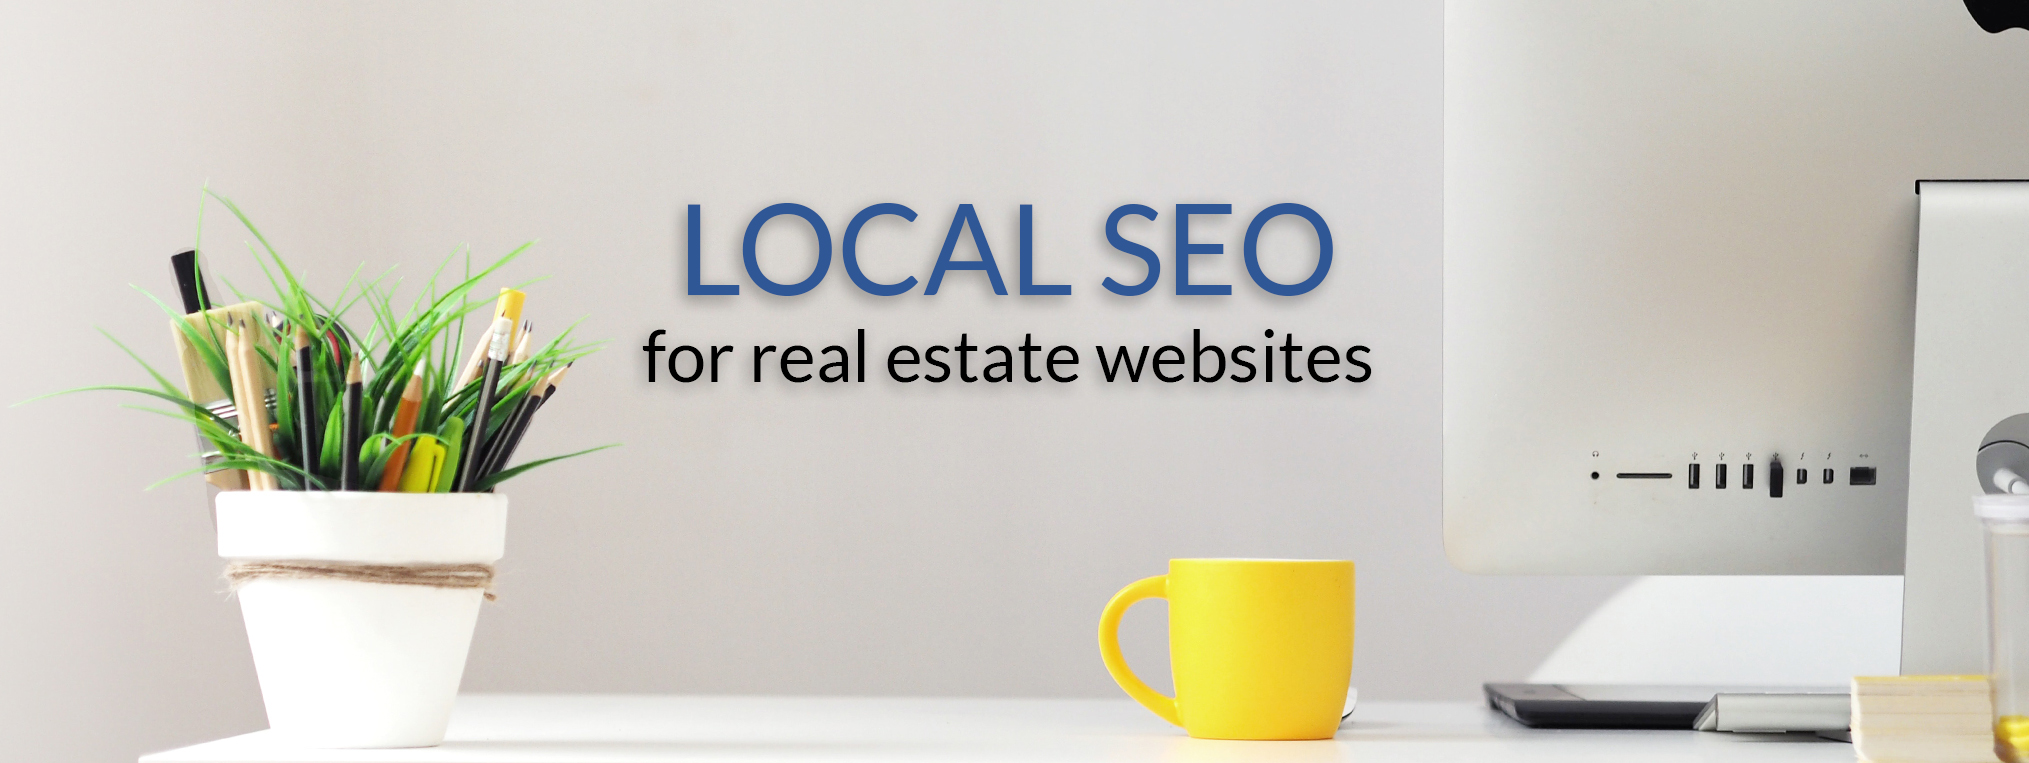 Real Estate SEO Ultimate Guide for 2021 - Easy Agent Pro